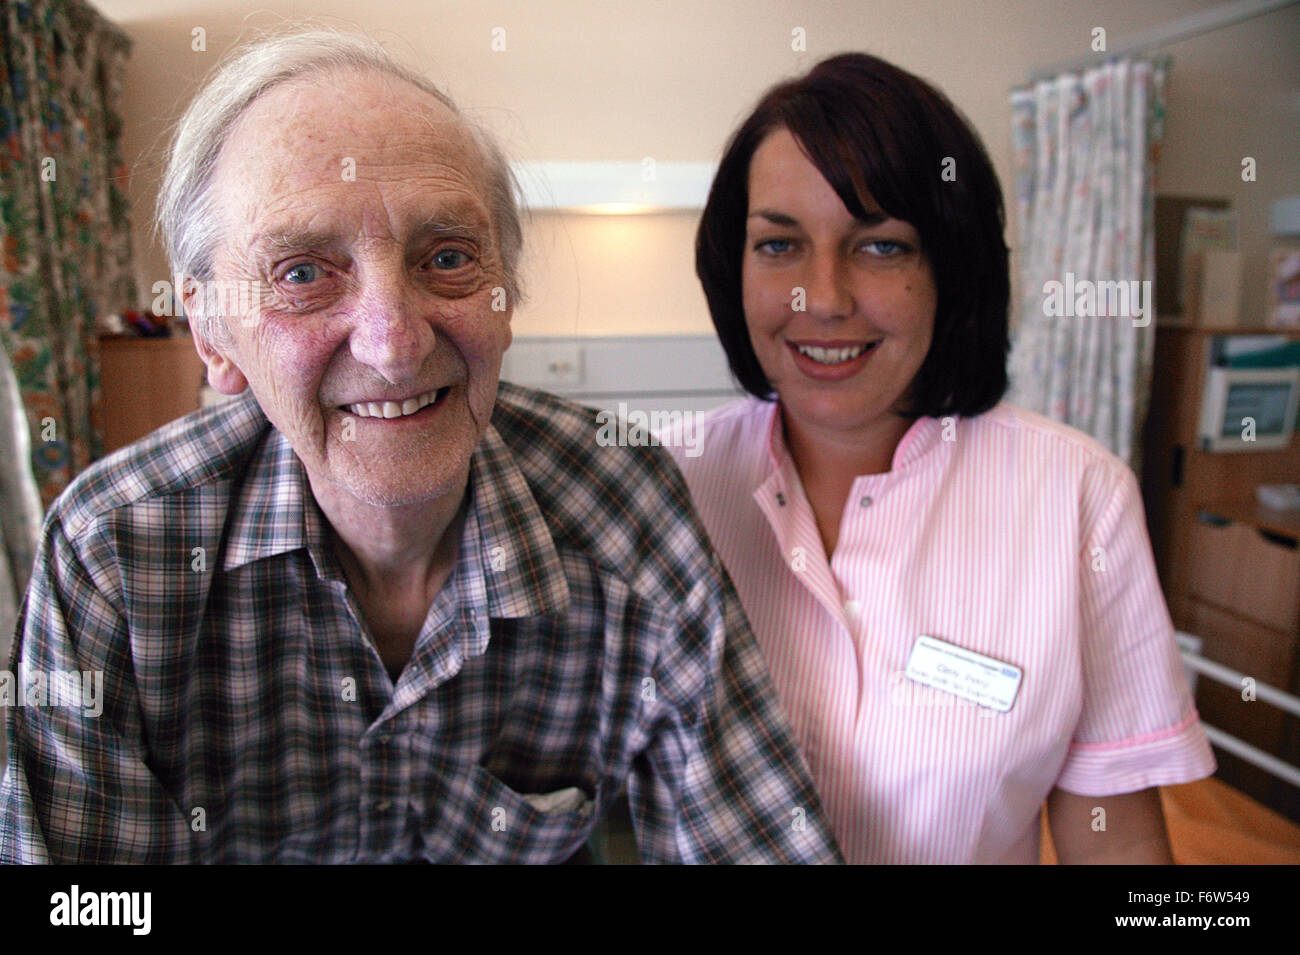 Health care worker and elderly patient standing together smiling, Stock Photo